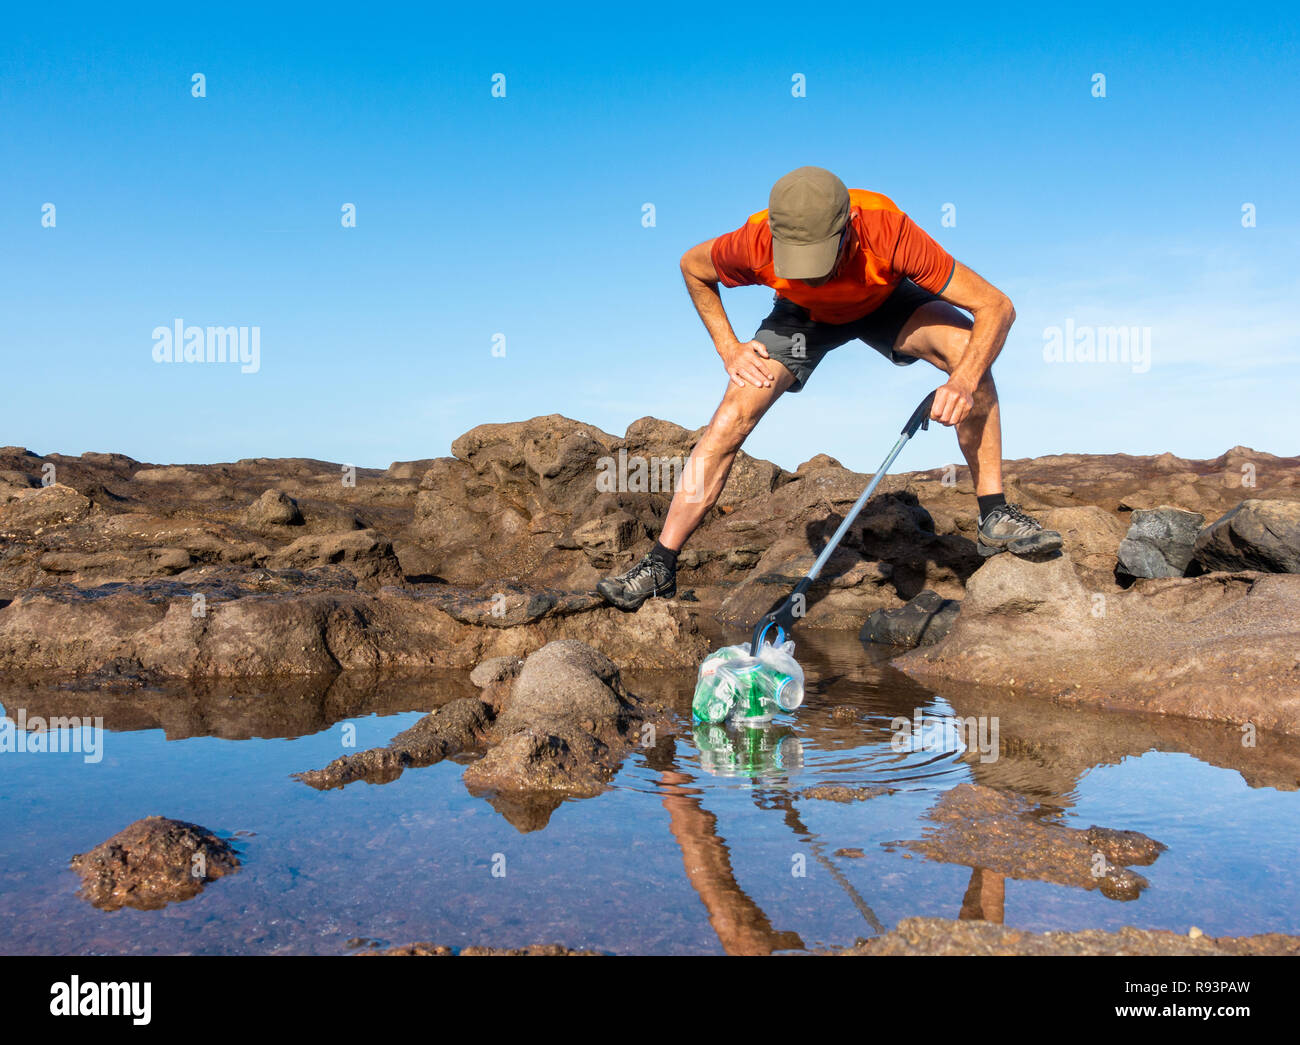 A Plogger/jogger collects plastic rubbish from beach during his morning run Stock Photo